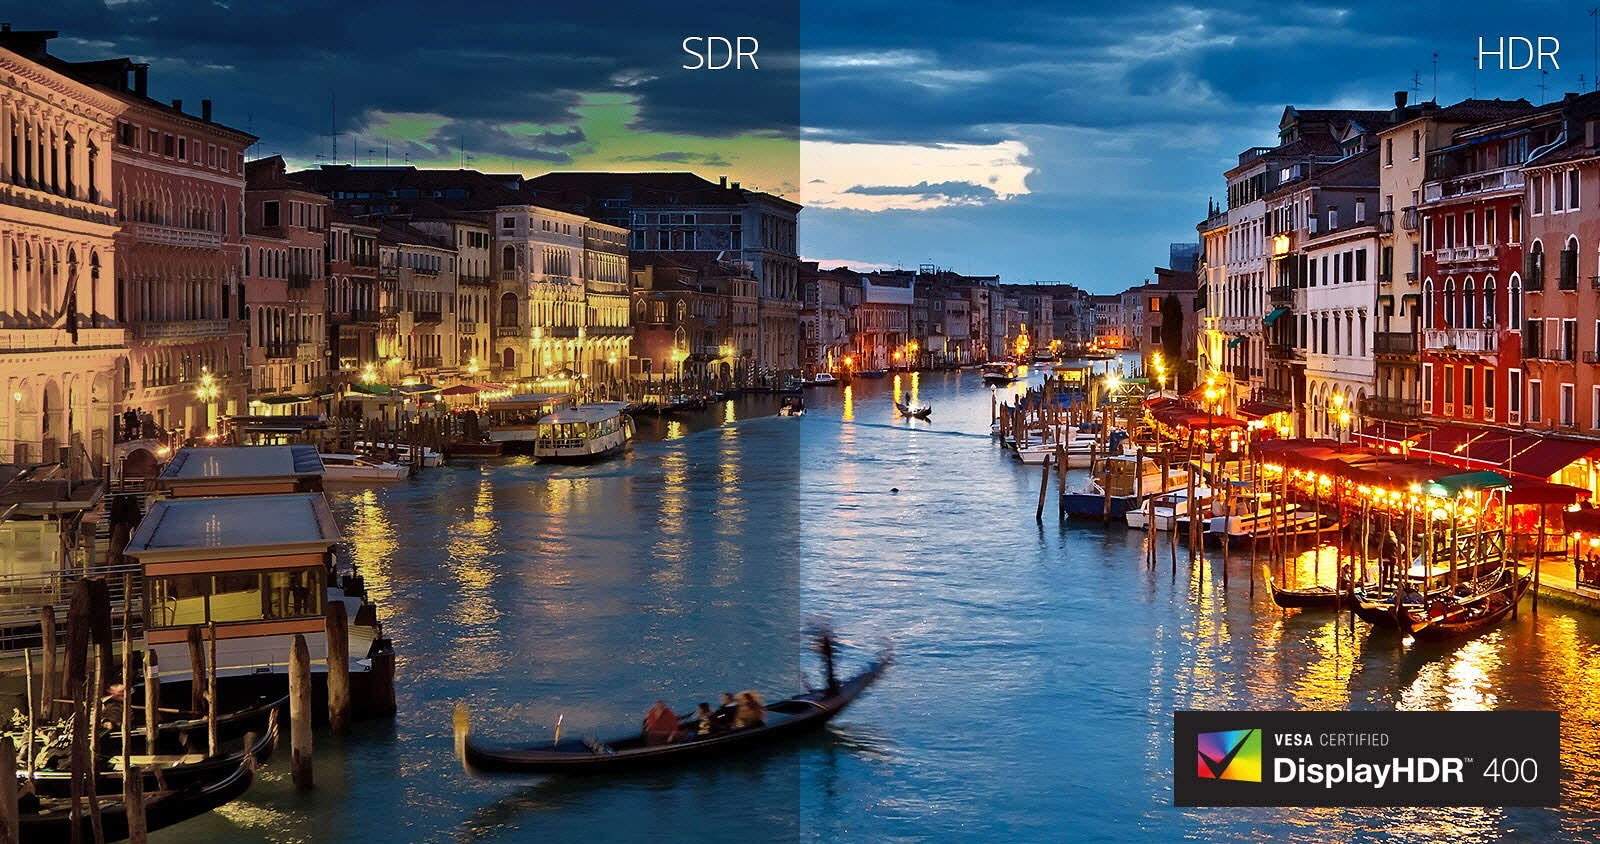 An image of HDR & SDR